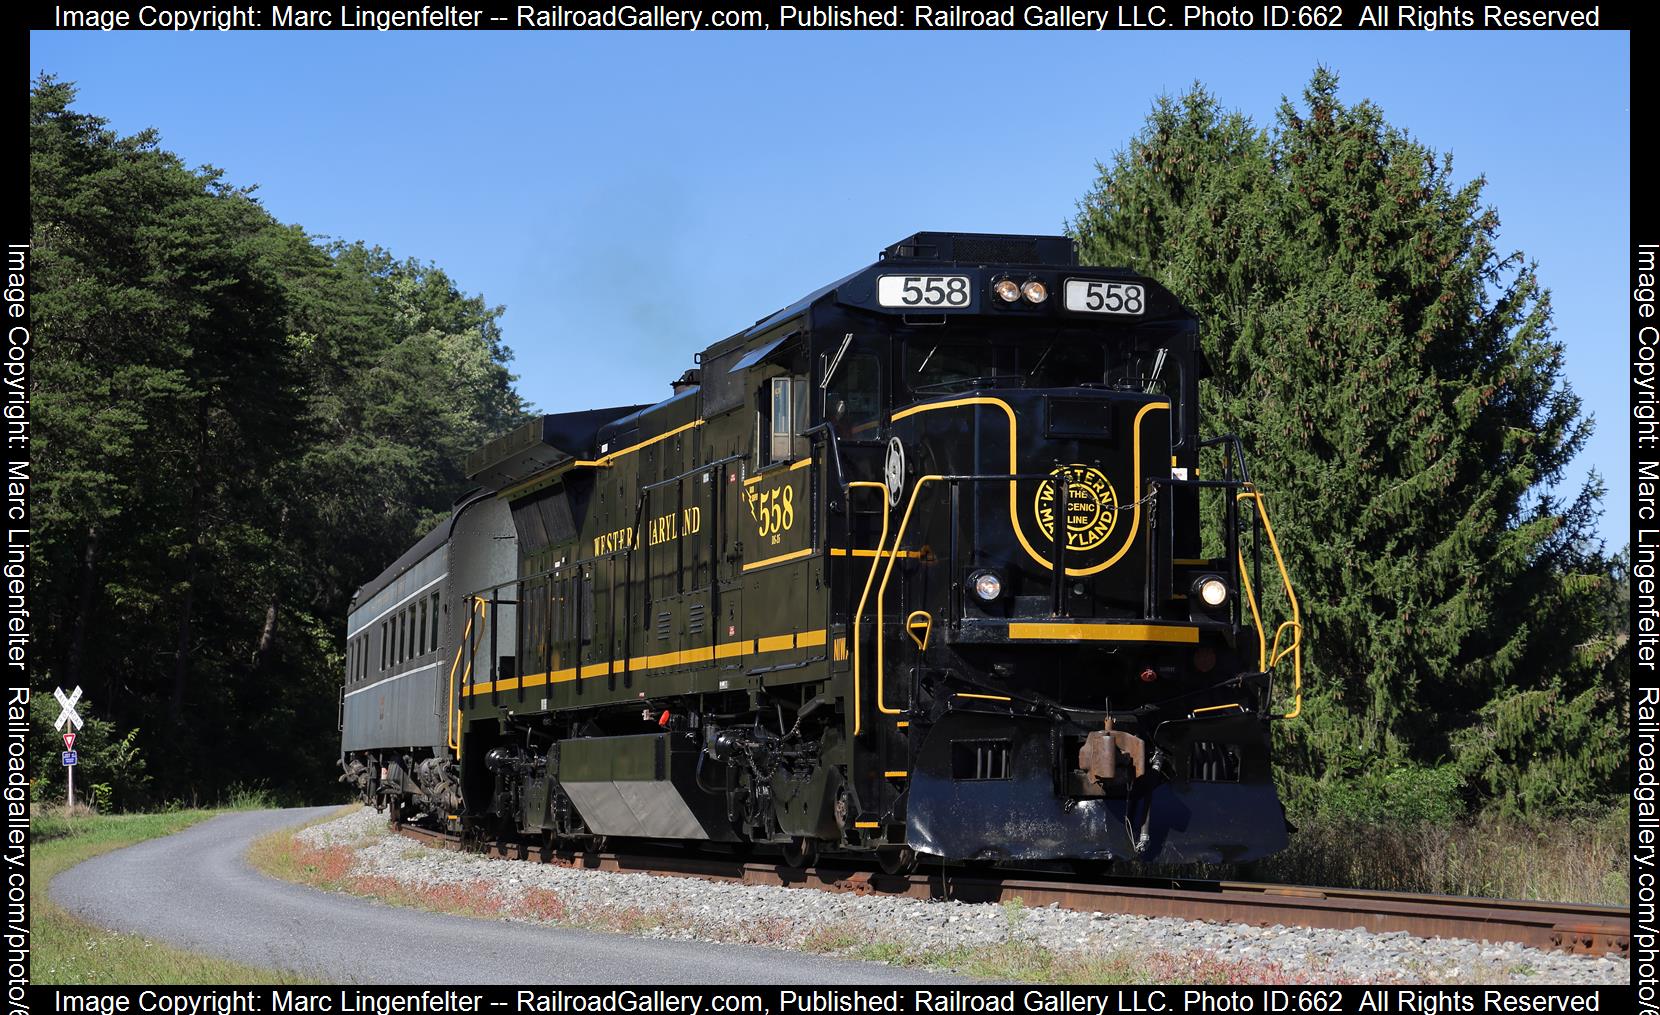 WMSR 558 is a class GE B32-8 (Dash 8-32B) and  is pictured in Cumberland, Maryland, USA.  This was taken along the WMSR Mainline on the Western Maryland Scenic Railroad. Photo Copyright: Marc Lingenfelter uploaded to Railroad Gallery on 02/02/2023. This photograph of WMSR 558 was taken on Friday, September 23, 2022. All Rights Reserved. 